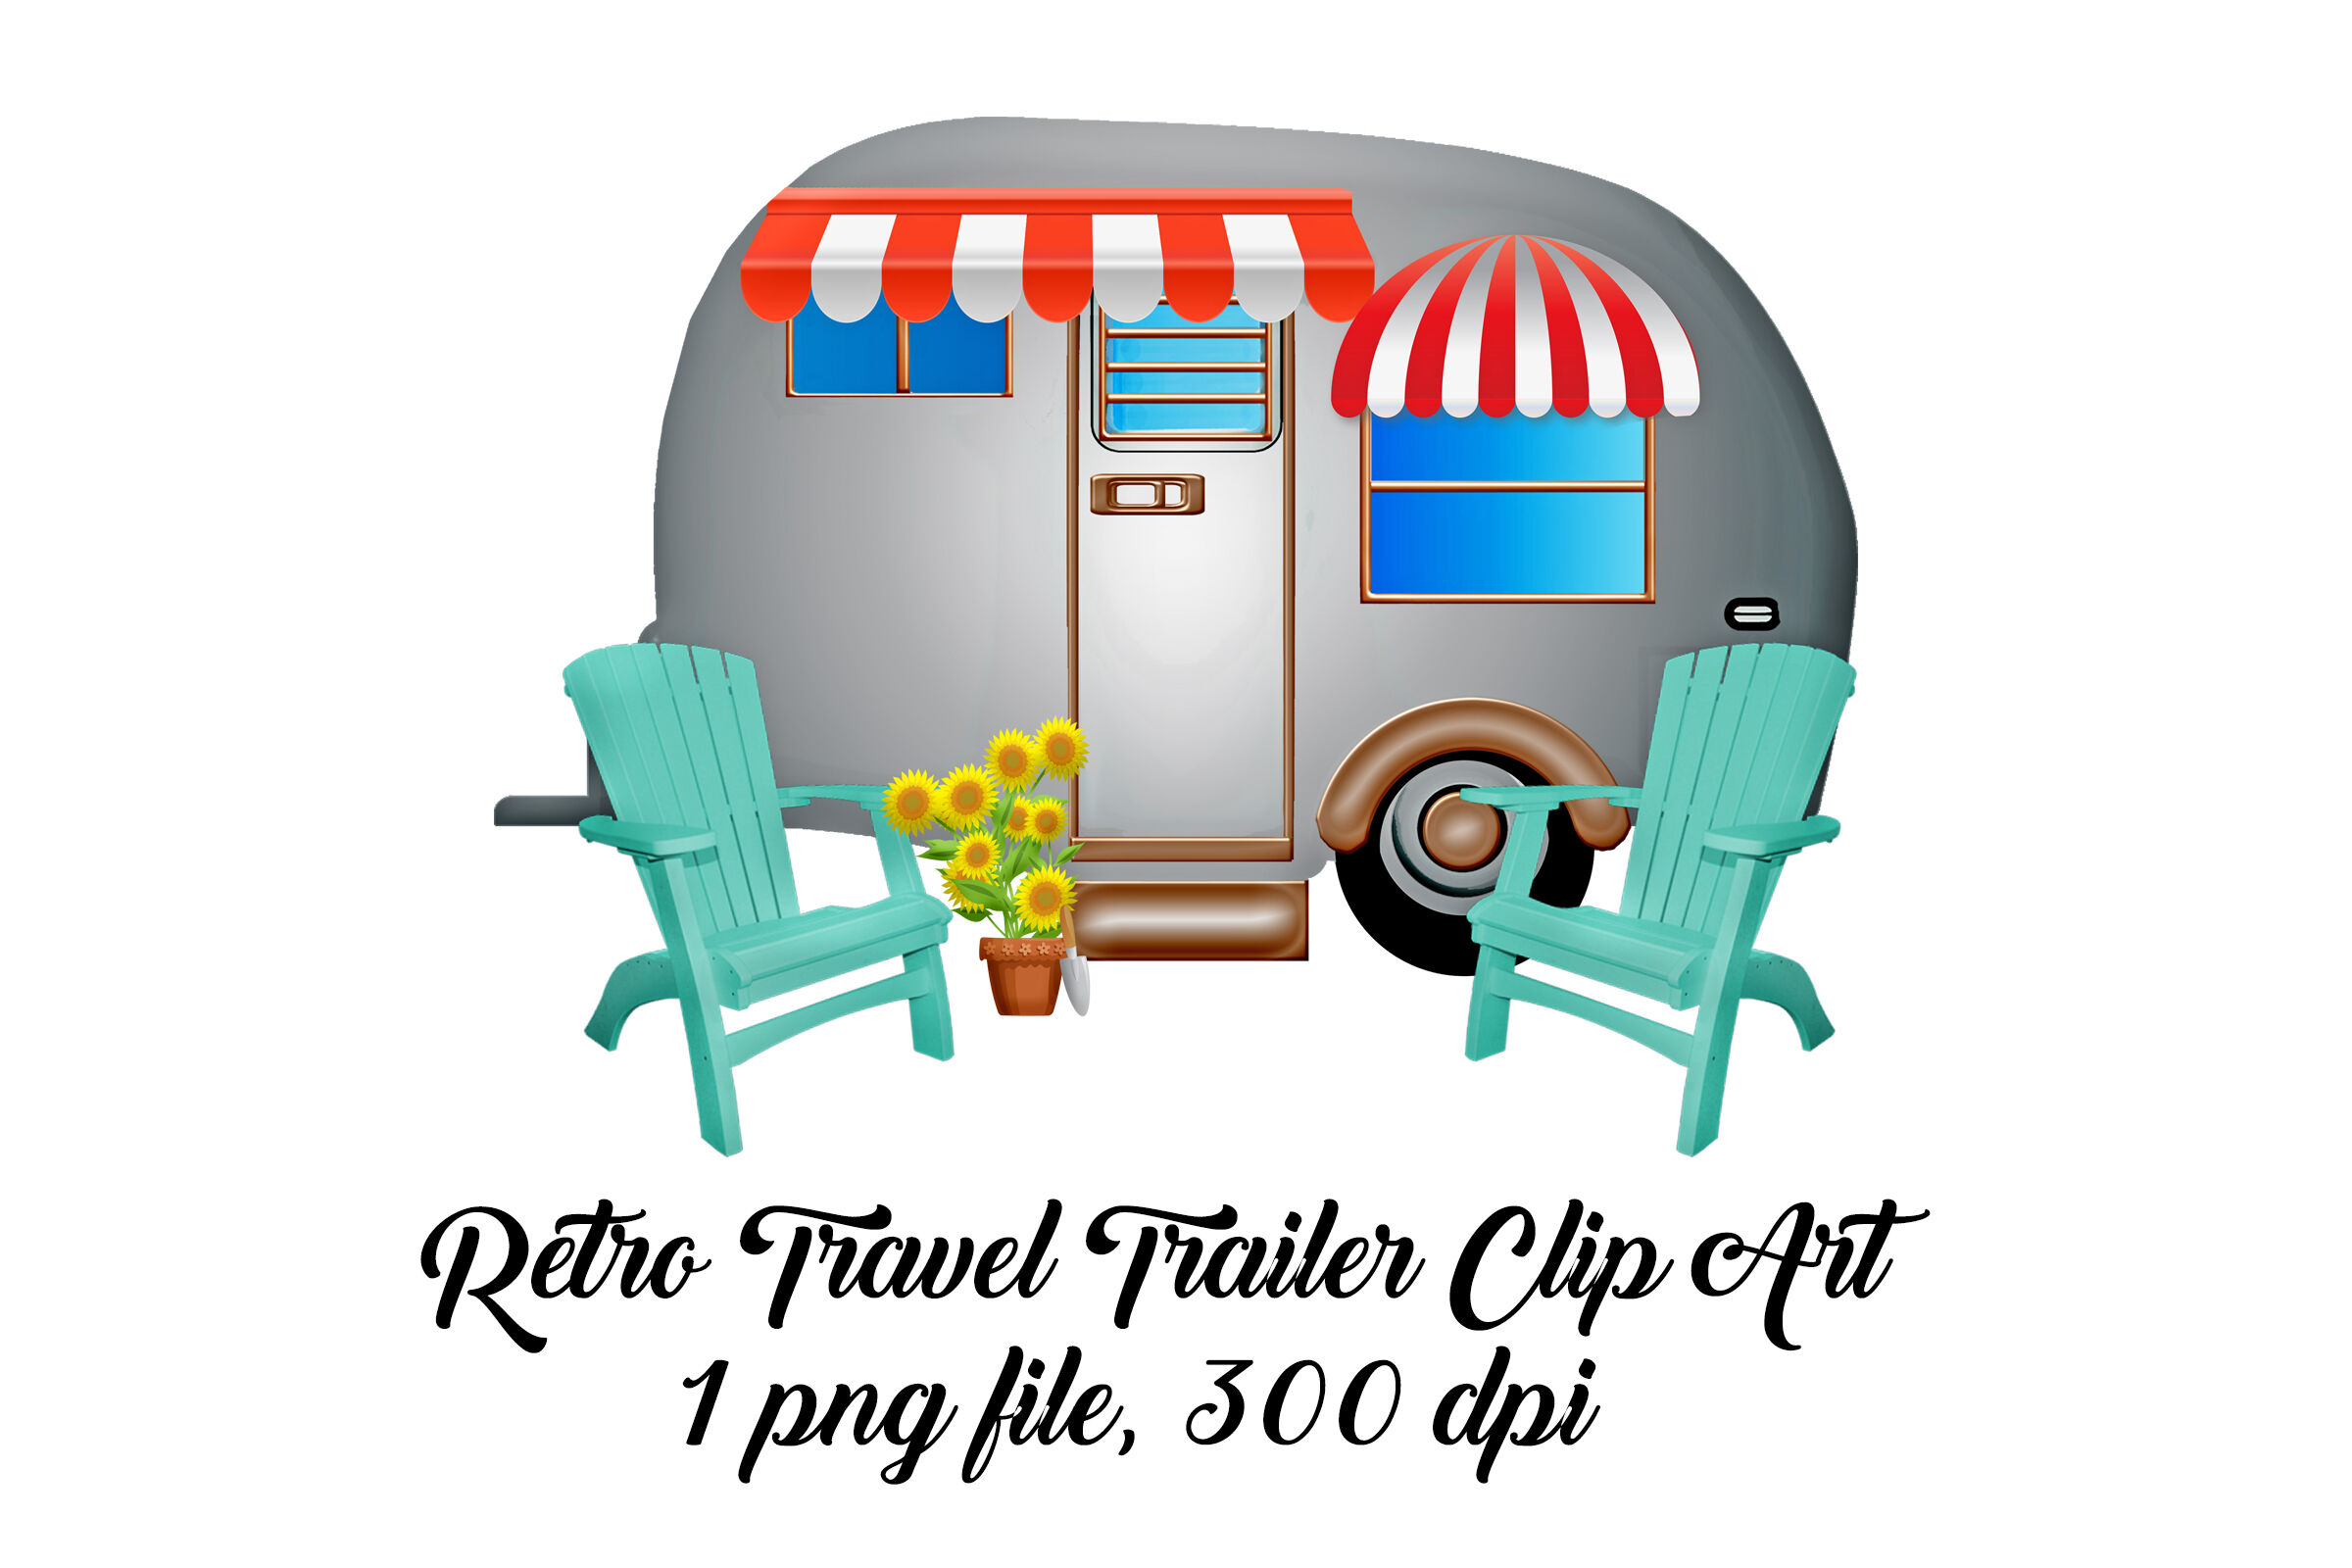 Retro Travel Trailer with Chairs Clip Art By Me and Ameliè